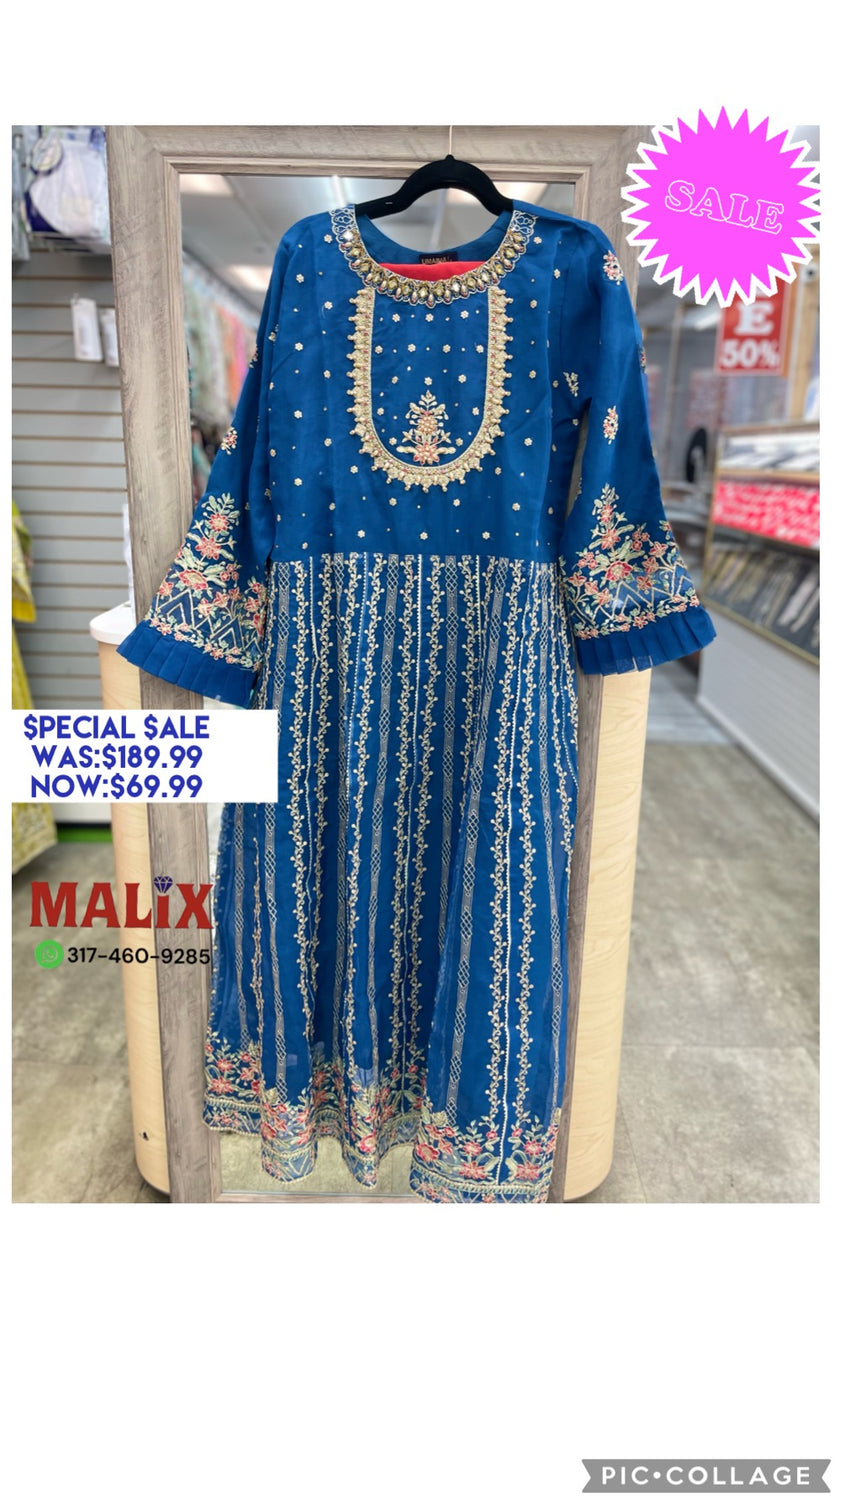 Blue Anarkali Gown with Gold Threaded Heavy Beads Neck Design, Red Dupatta, and Bottom Pants."